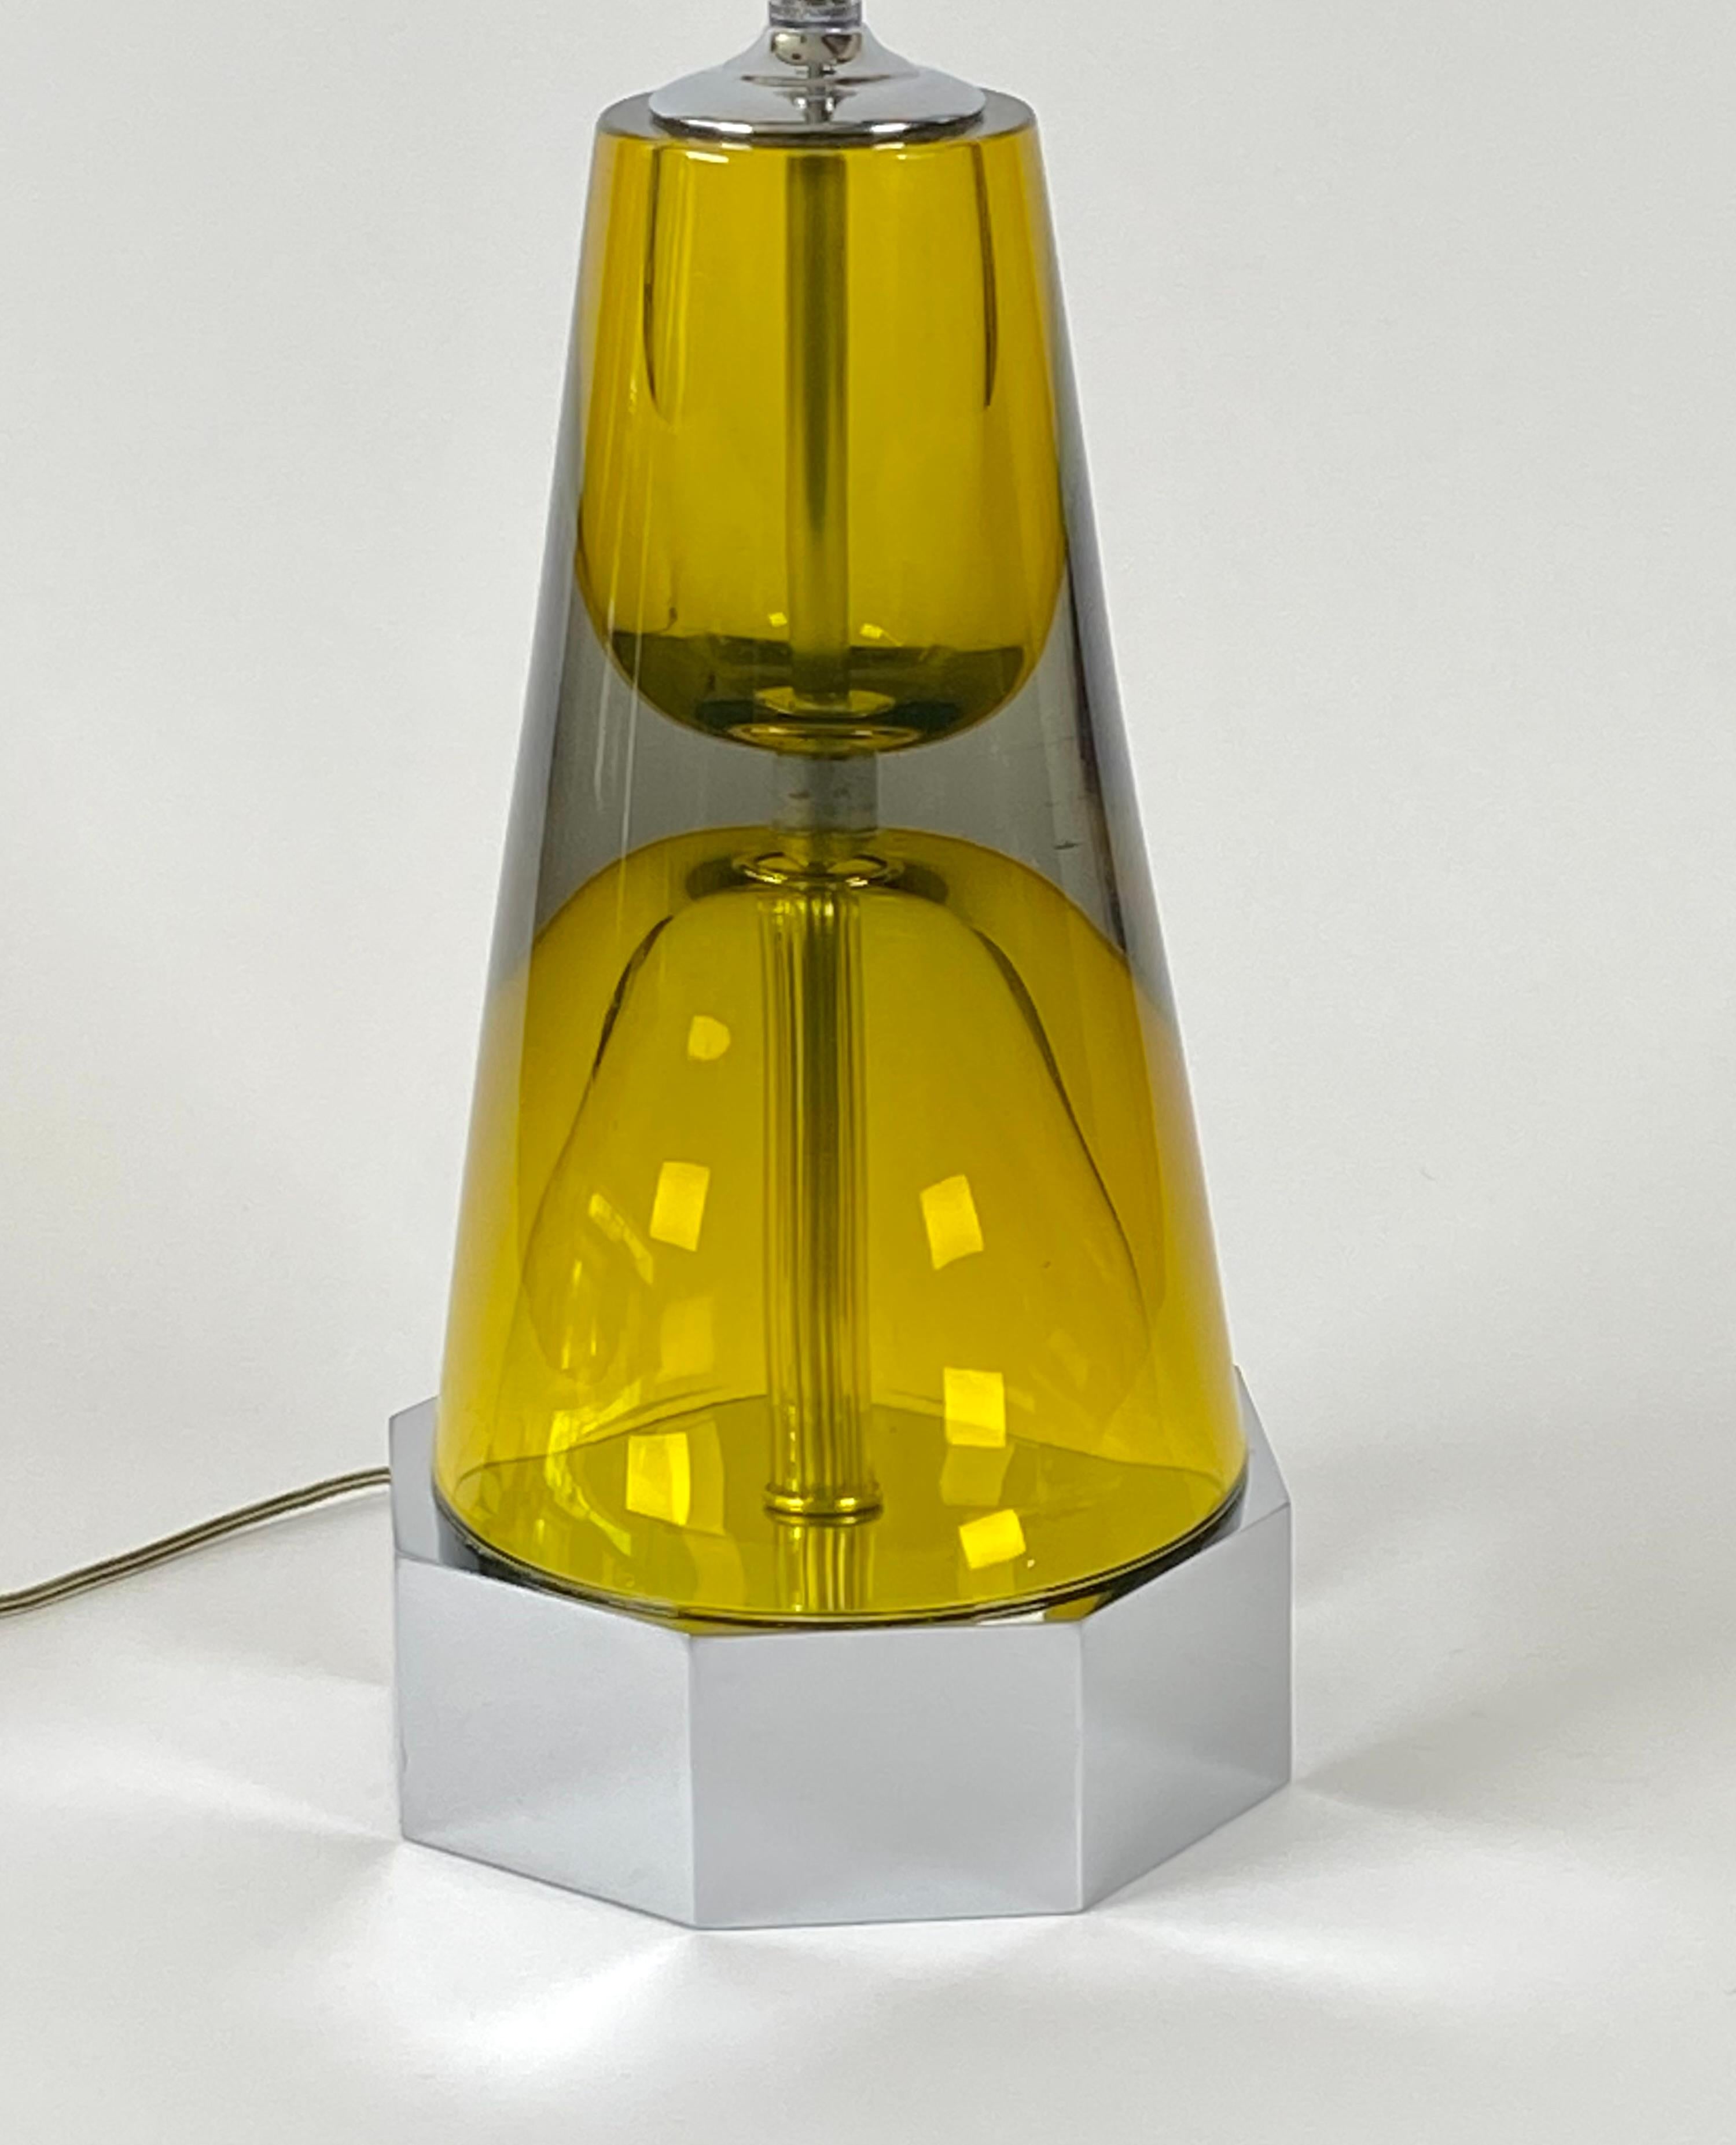 Large scale Murano Sommerso glass table lamp with all original chromed hardware, thick amber green colored glass body resting on a chromed octagonal base, with two chain pull sockets and a switch on the base. The finial has an additional 2 inch